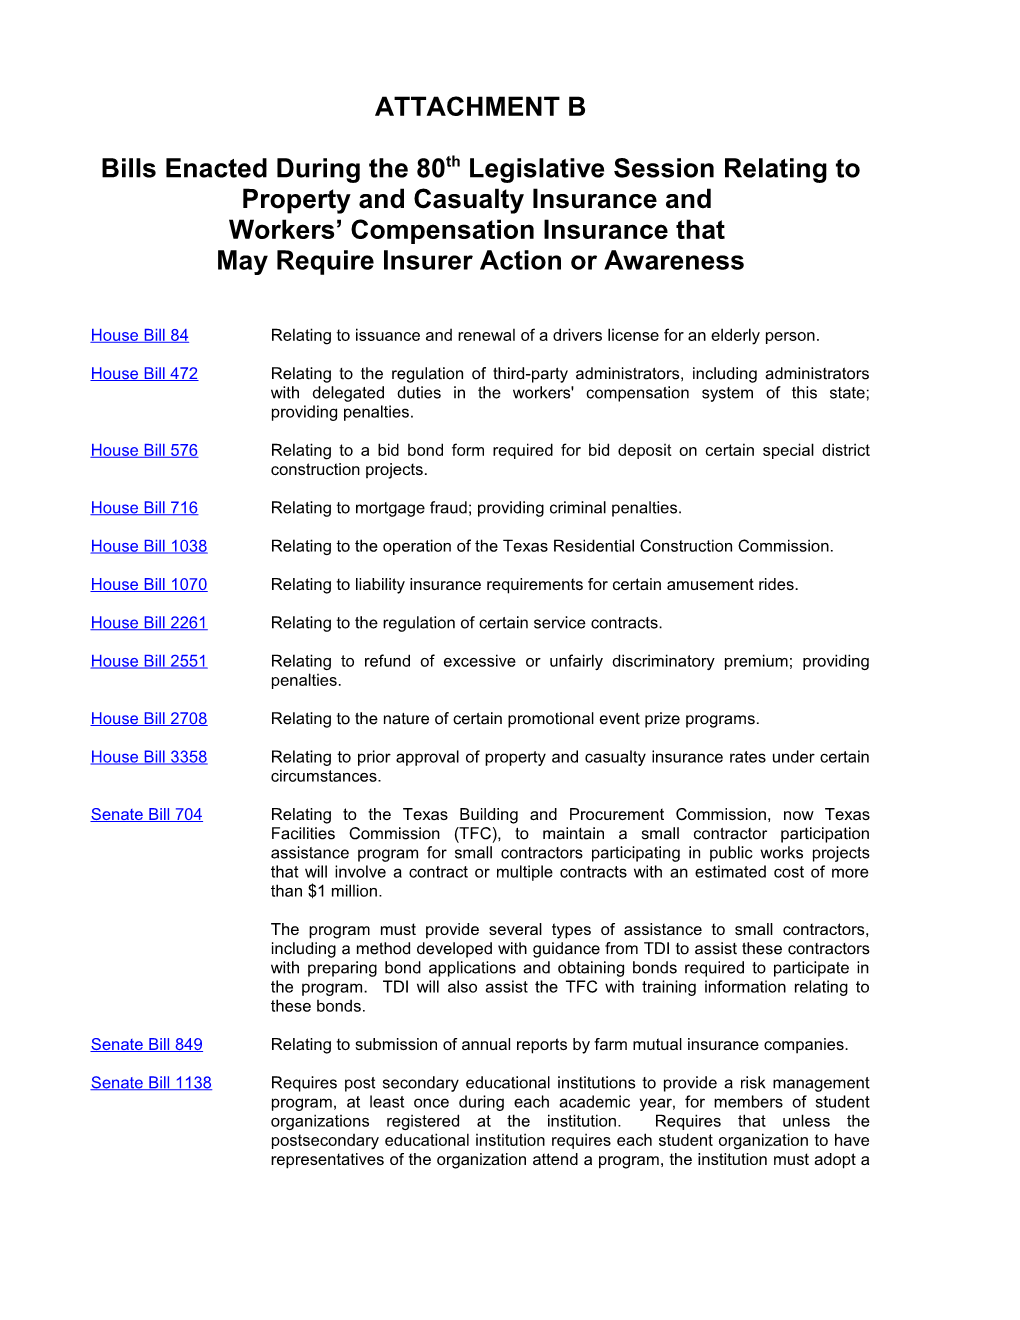 Bills Enacted During the 80Thlegislative Sessionrelating Toproperty and Casualty Insurance And